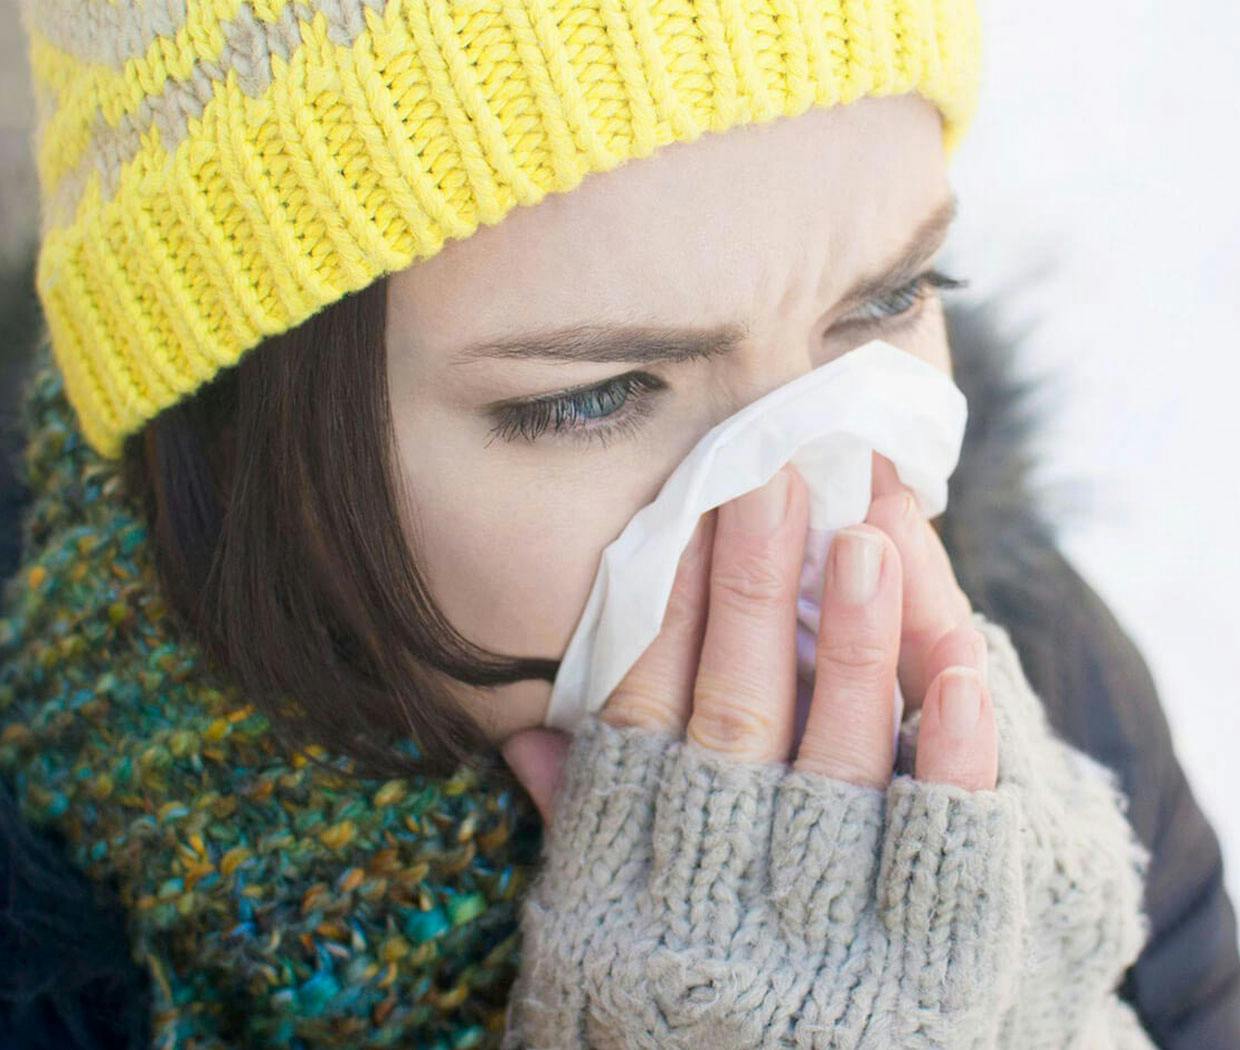 Woman dressed in winter clothing blowing her nose